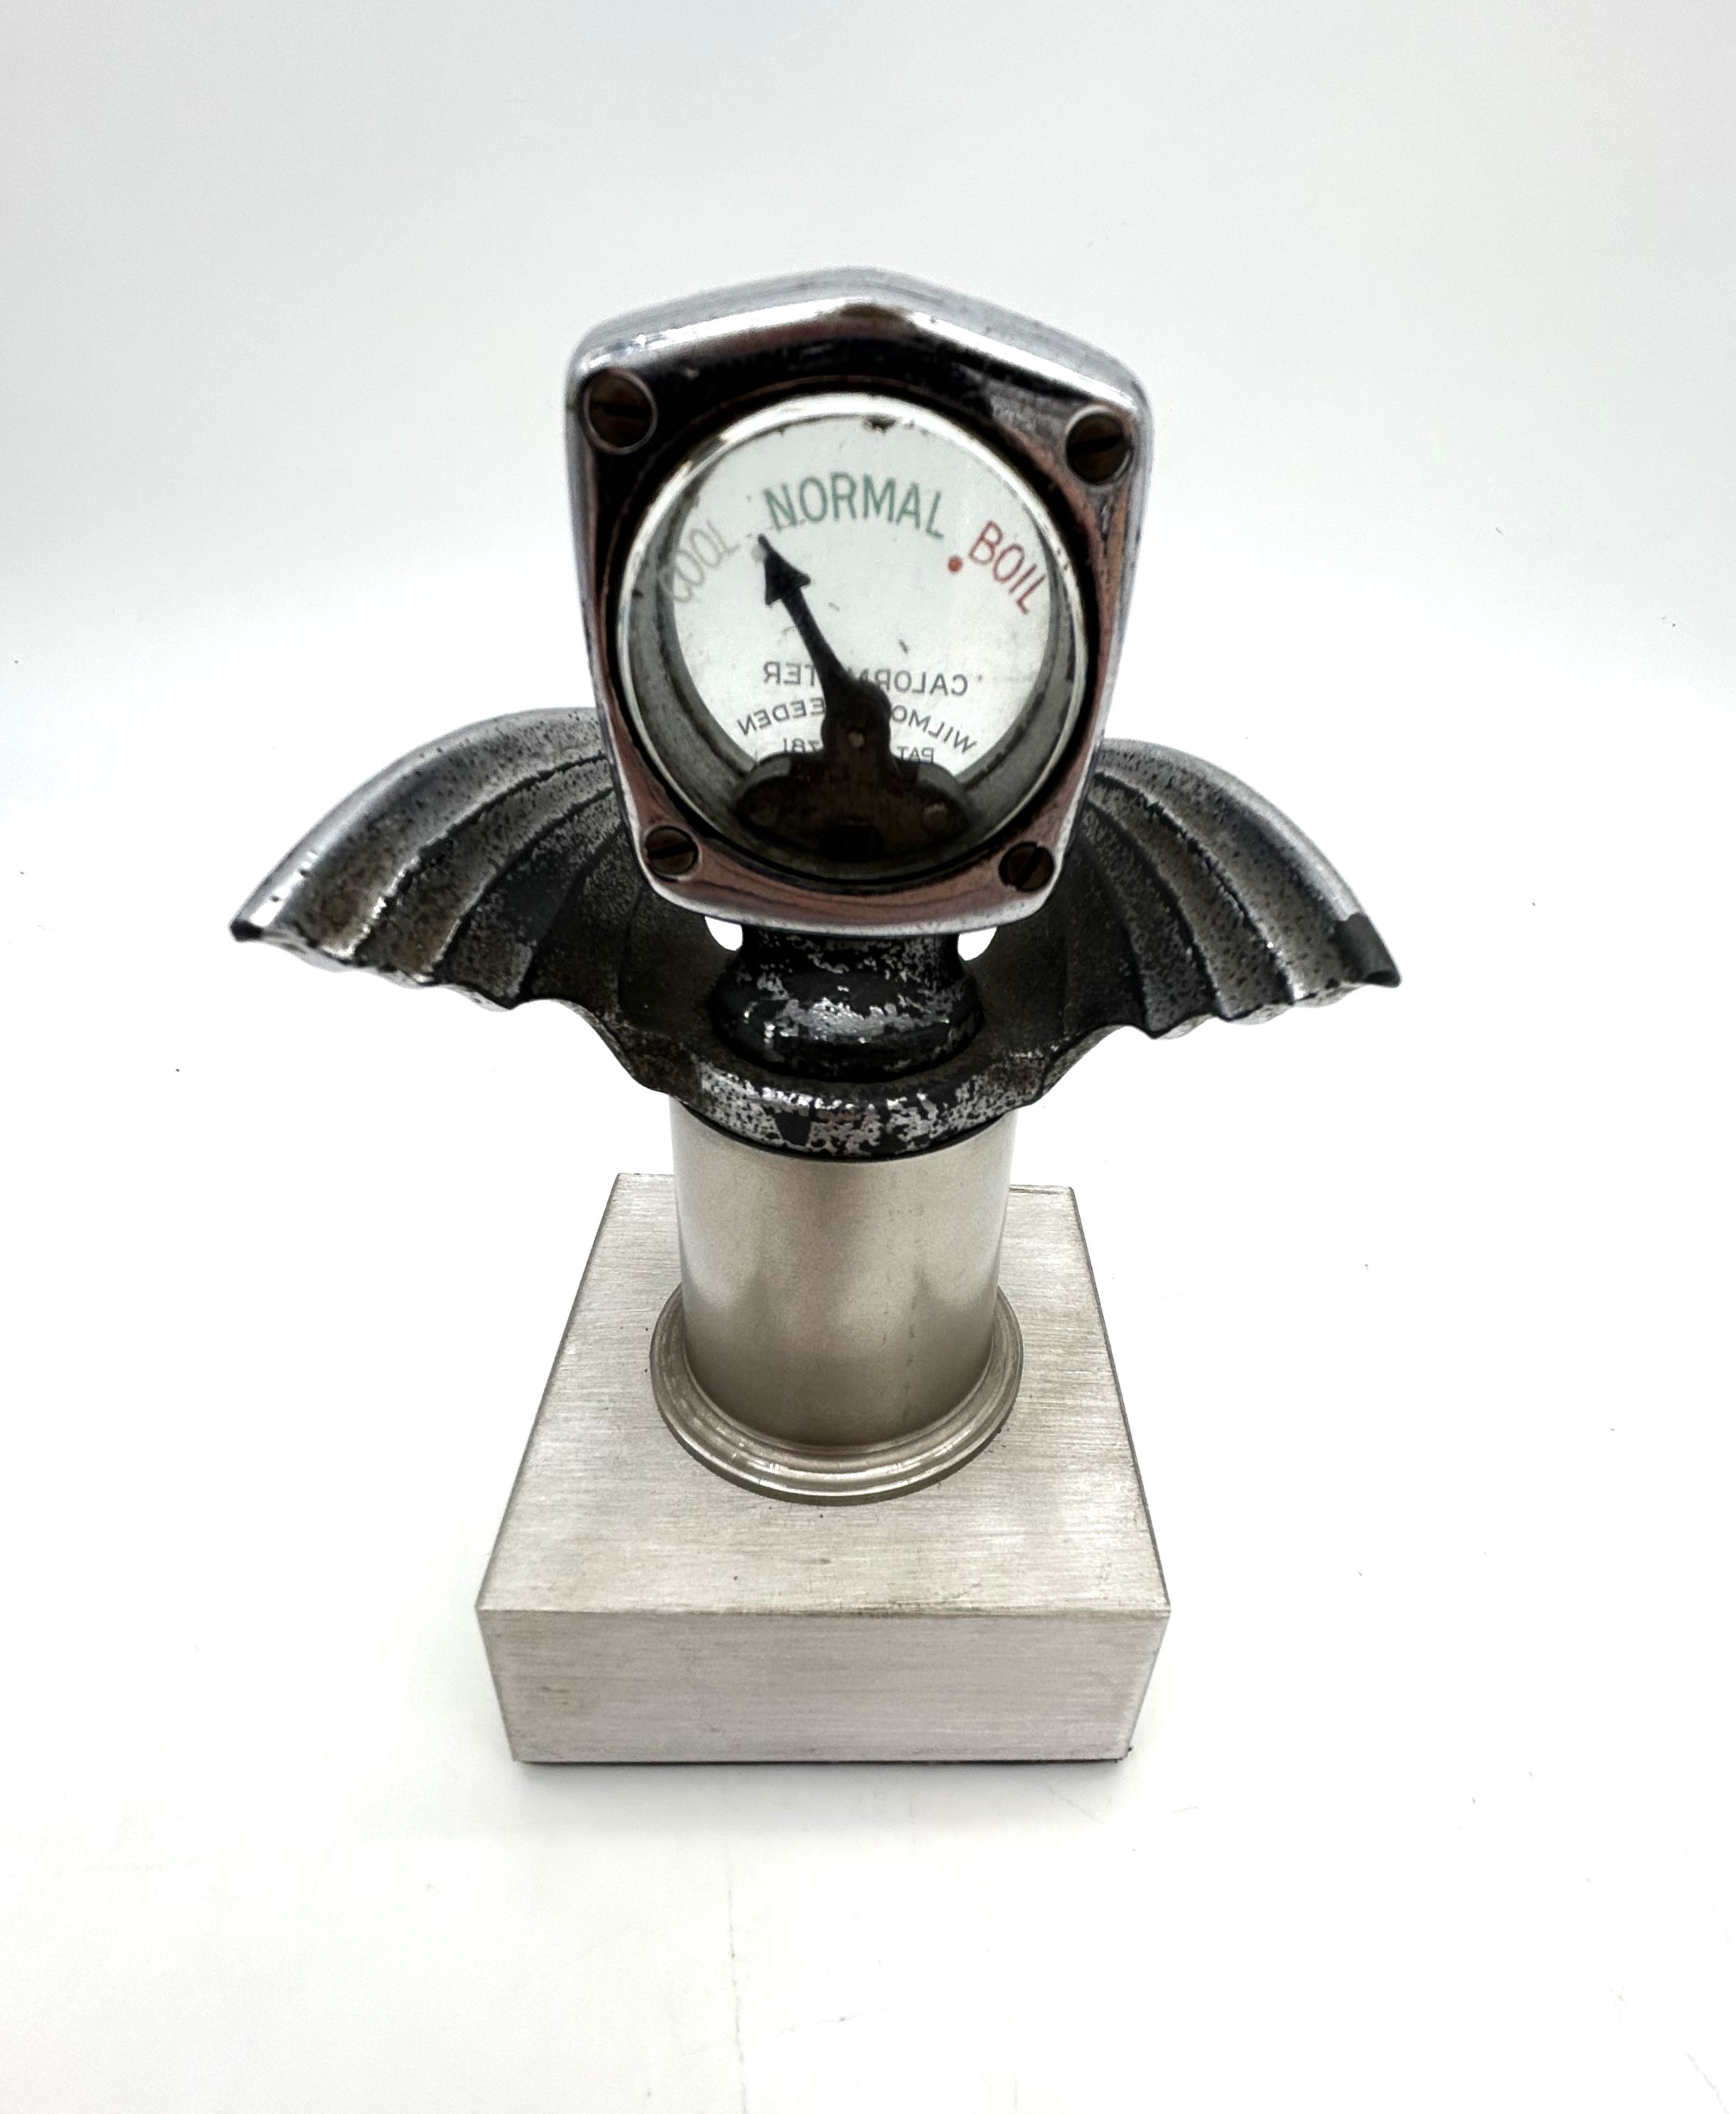 1930S WILMOT-BREEDEN CALORMETER CAR MASCOT  As used on several motoring marques of the period, - Image 8 of 8